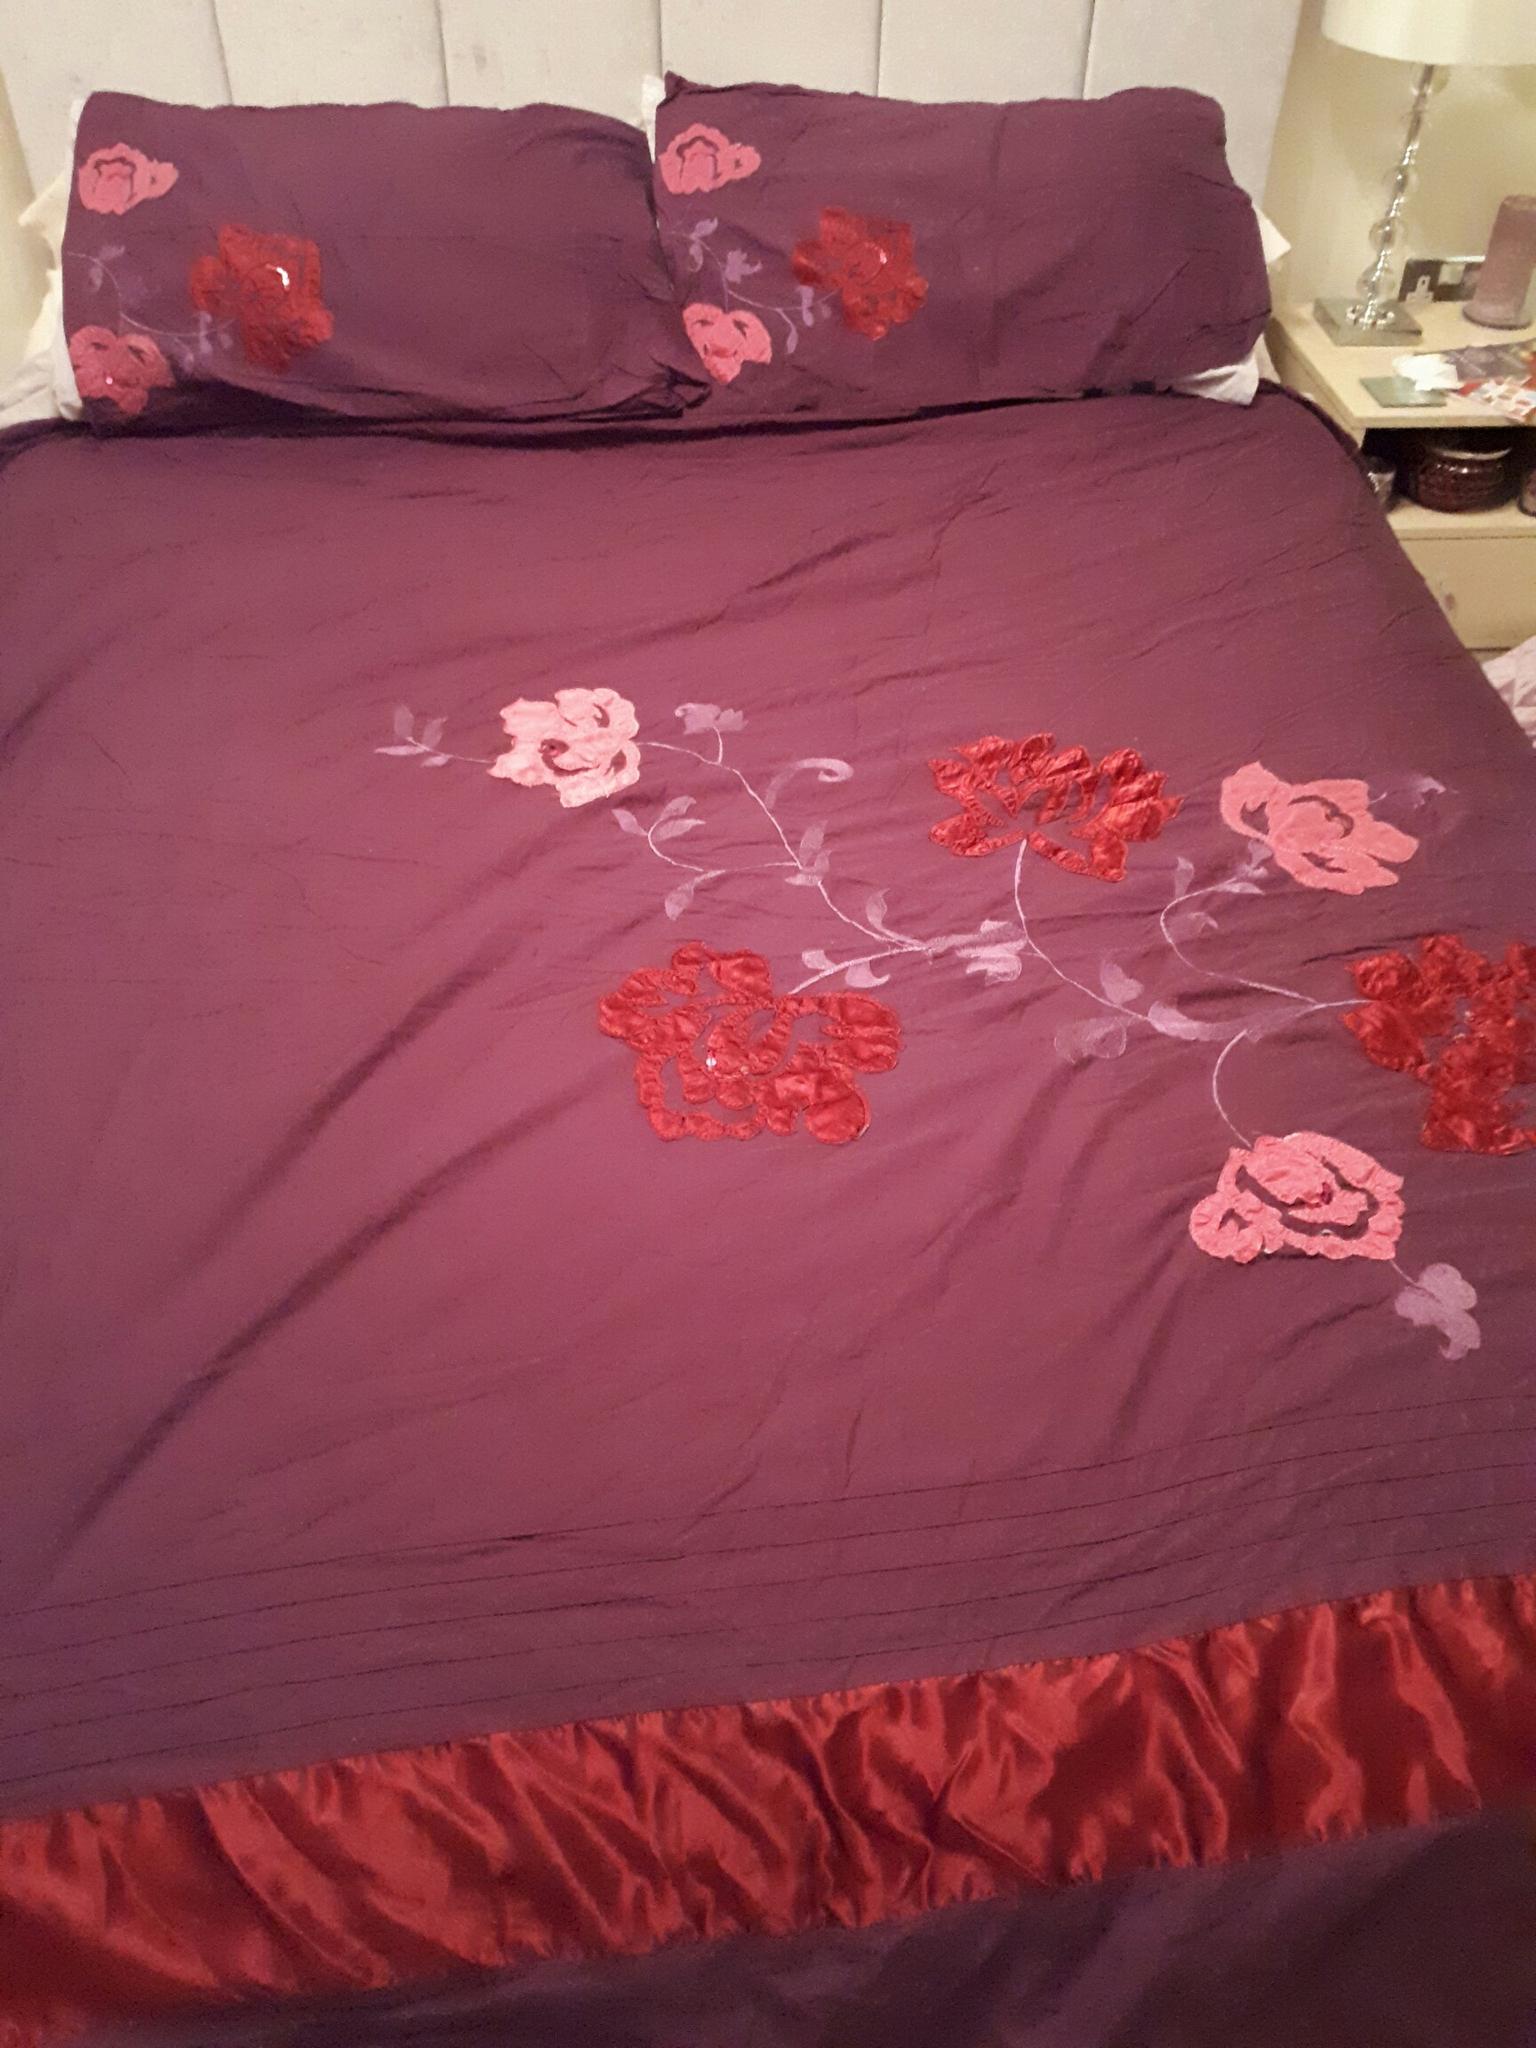 Double Duvet Cover Purple In Ts5 Middlesbrough For 8 00 For Sale